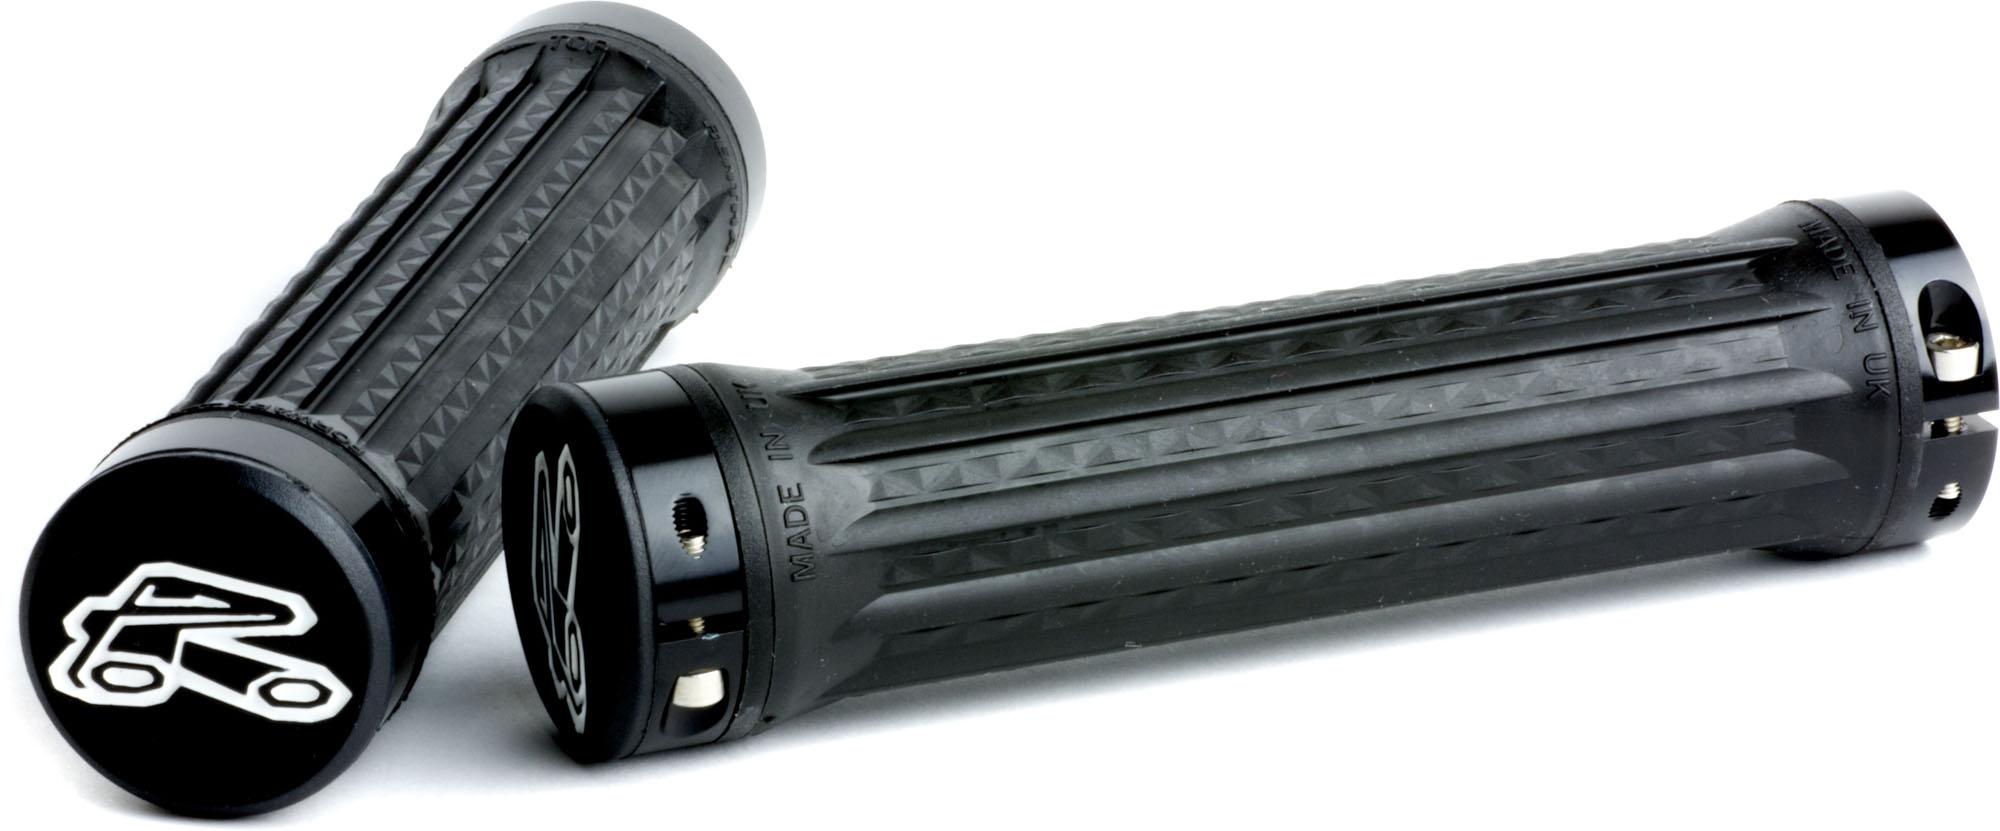 Renthal Lock-on Traction Grips - Black